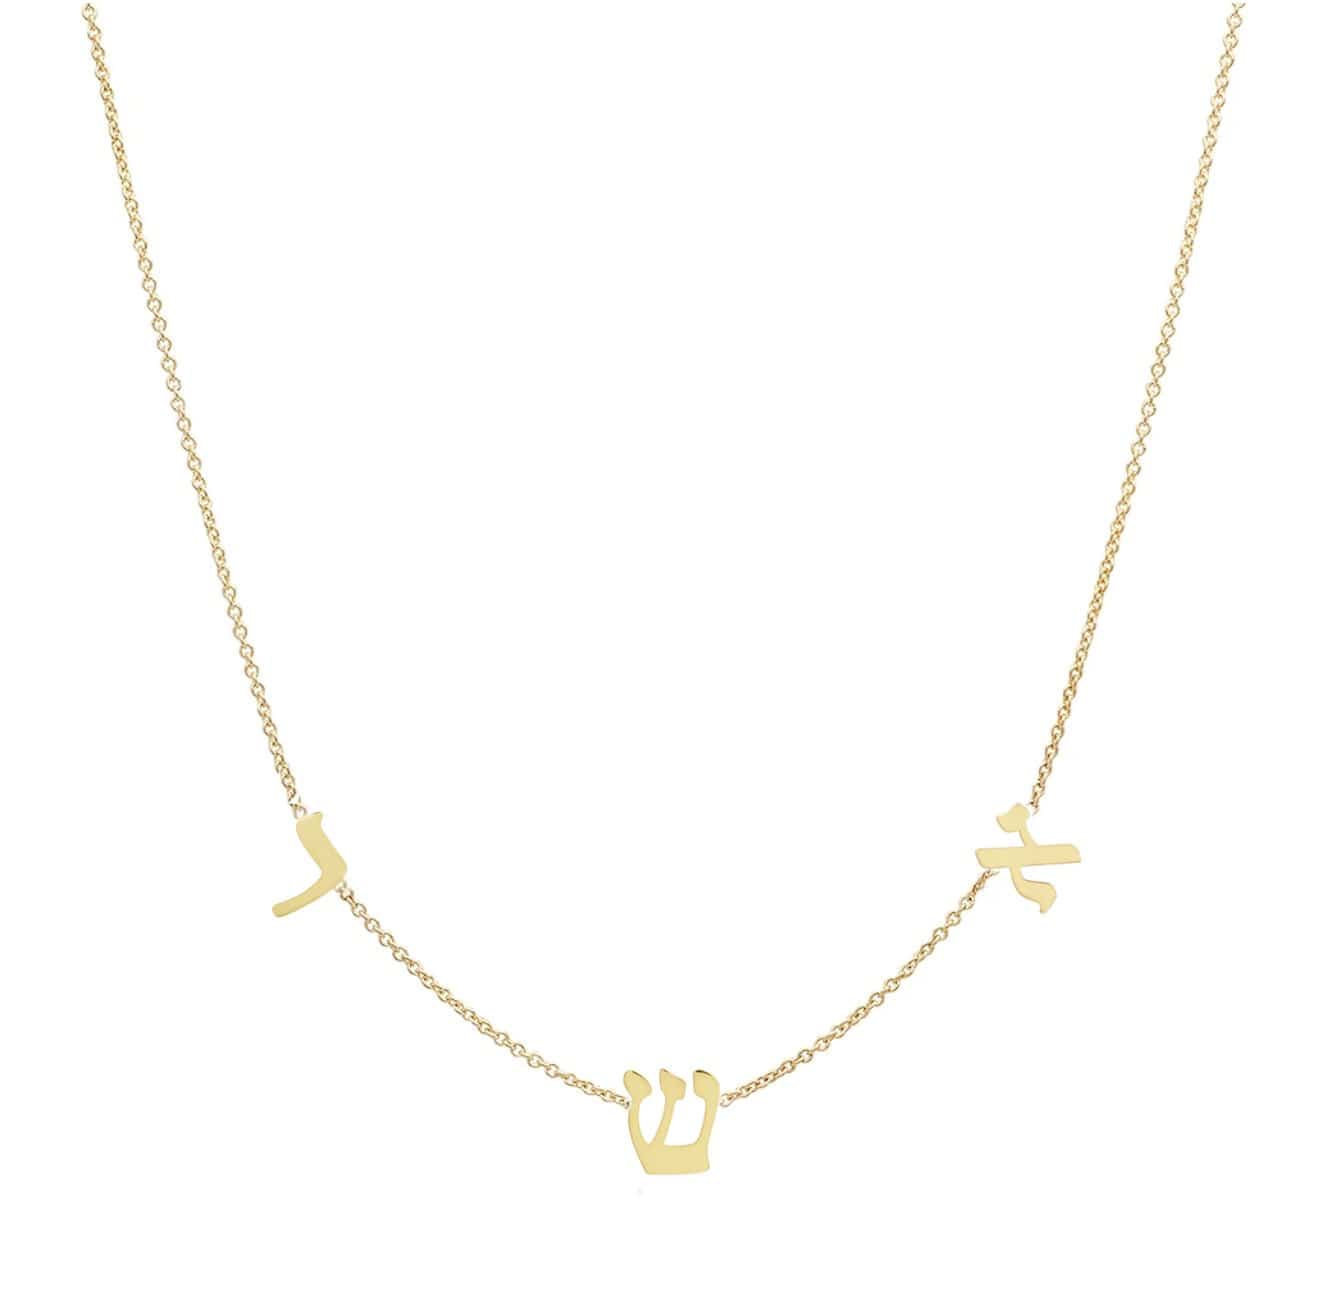 Miriam Merenfeld Jewelry Necklaces Taly Initial Necklace - Silver or Gold (Up to 6 Letters)